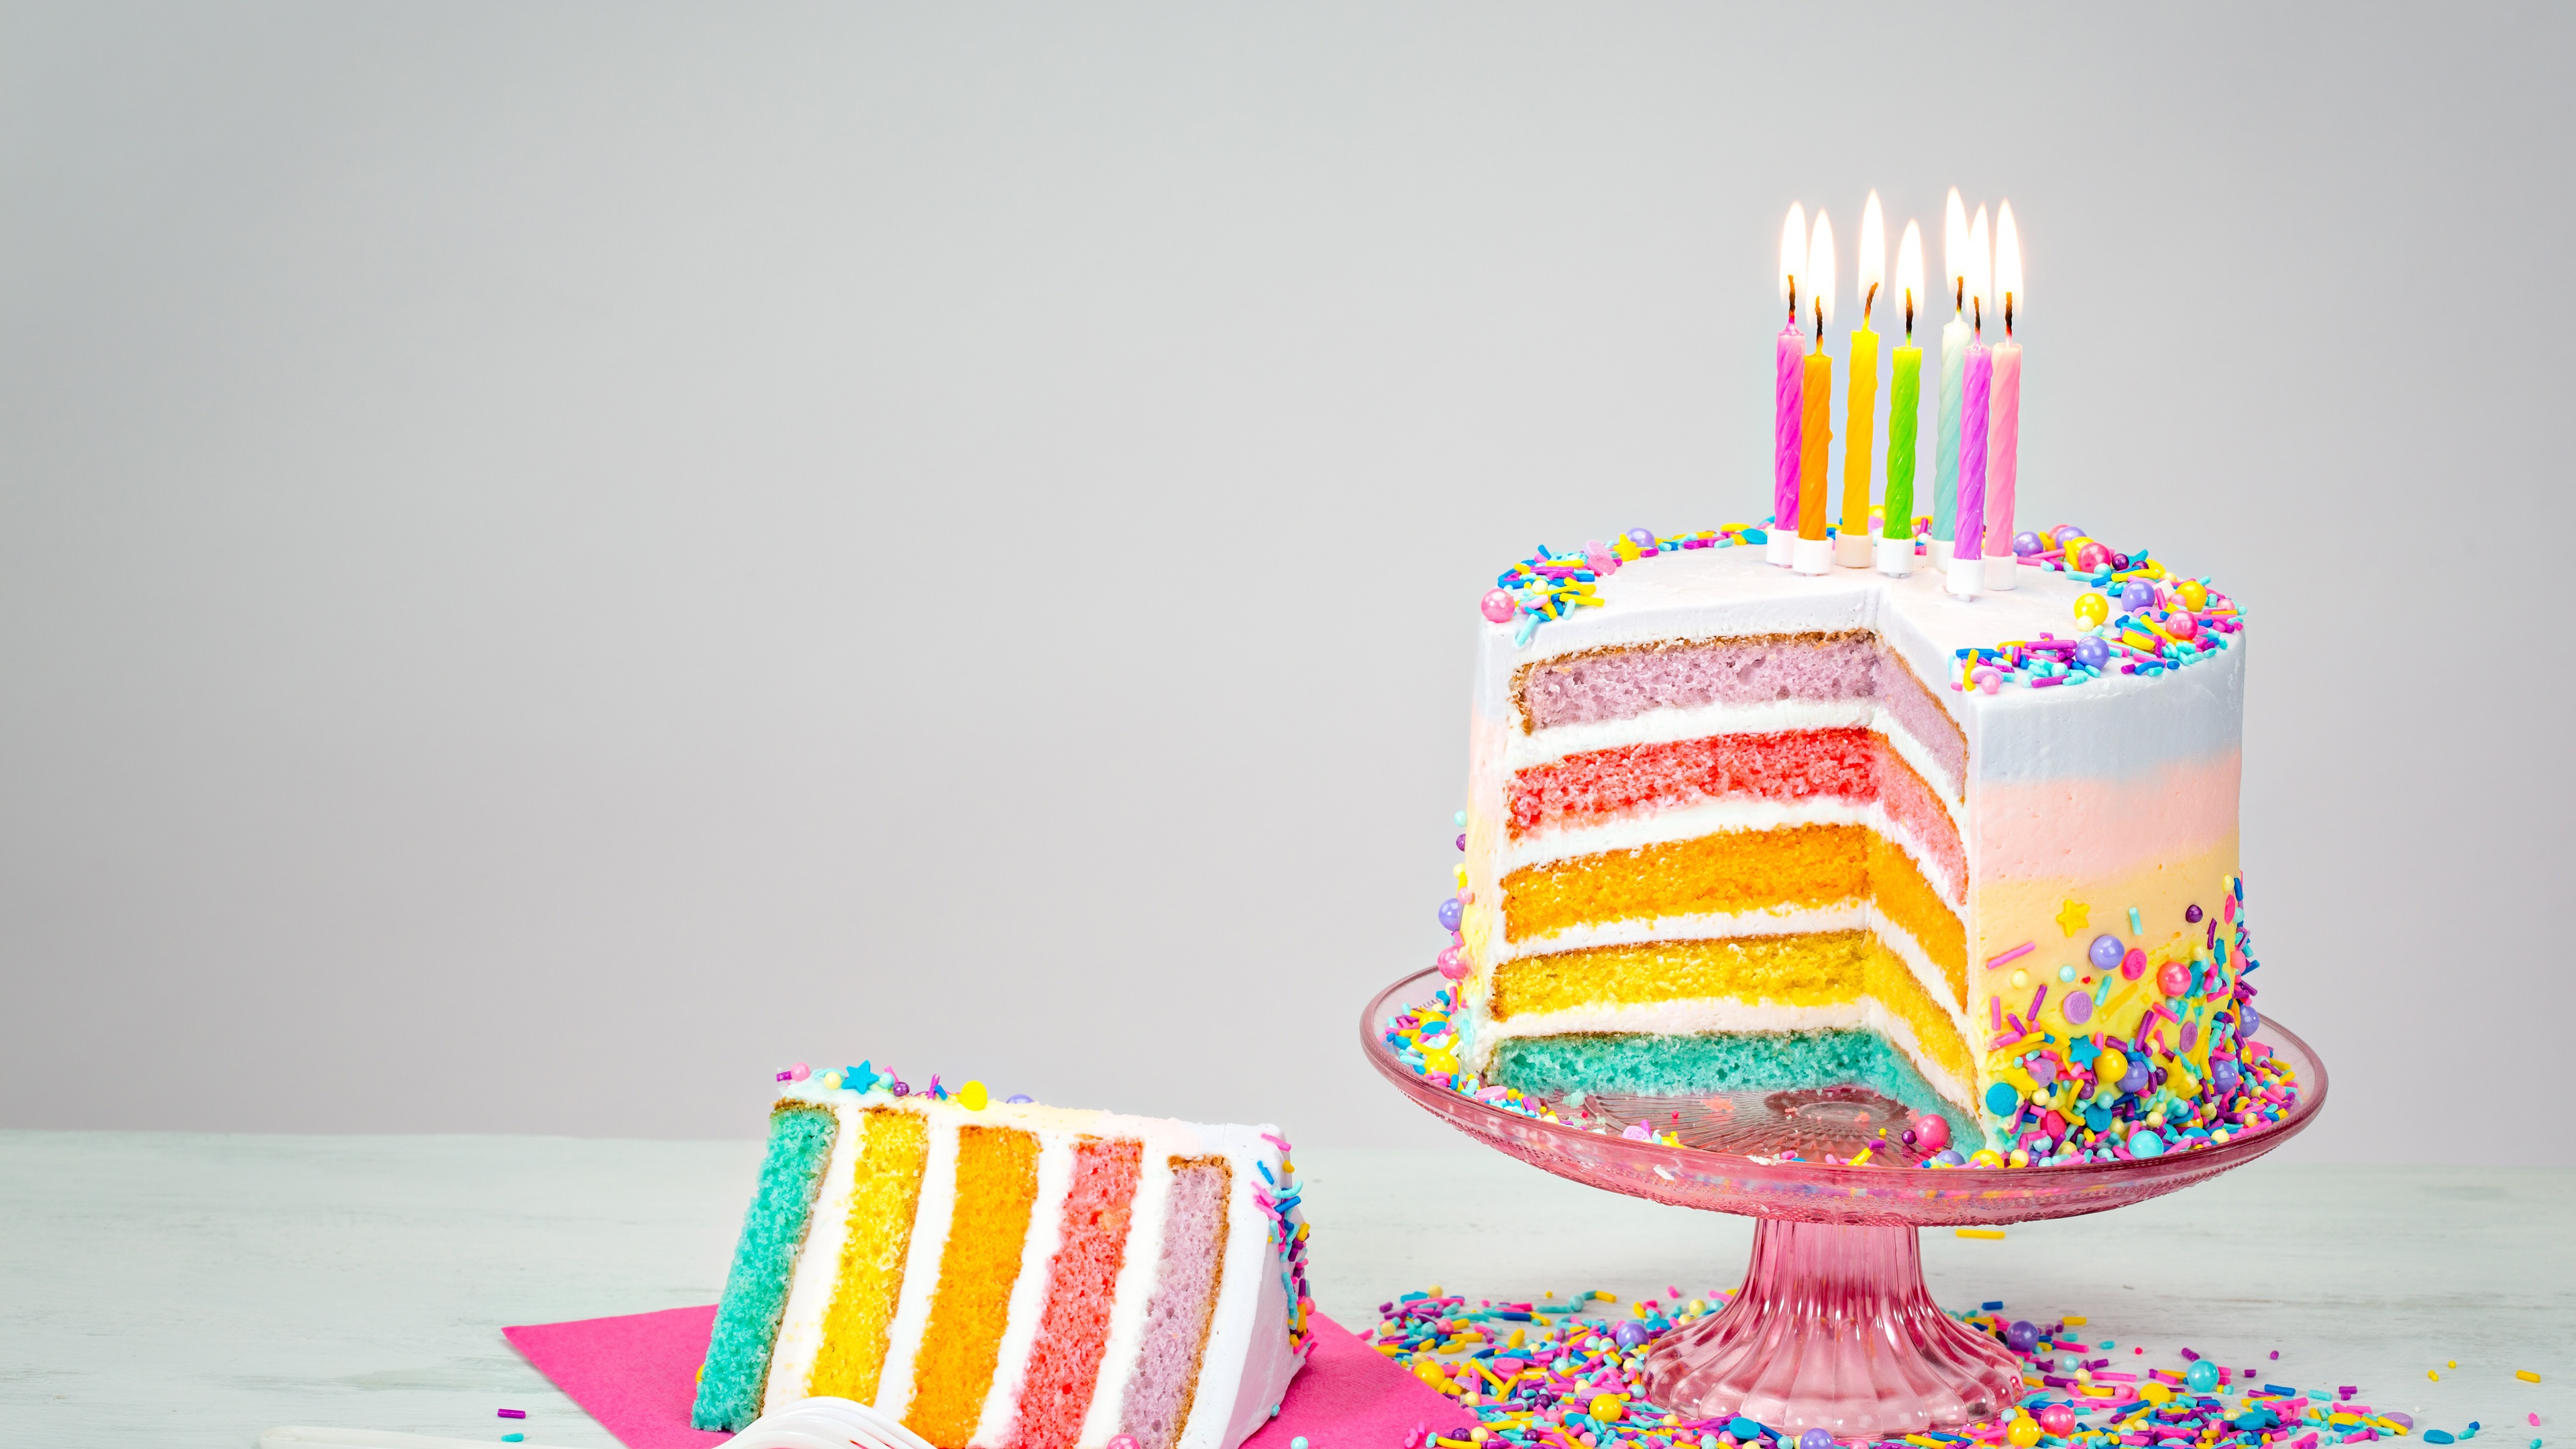 Wallpaper Rainbow Colors Birthday Cake, Candles, Flame - Rainbow Cake Birthday - HD Wallpaper 